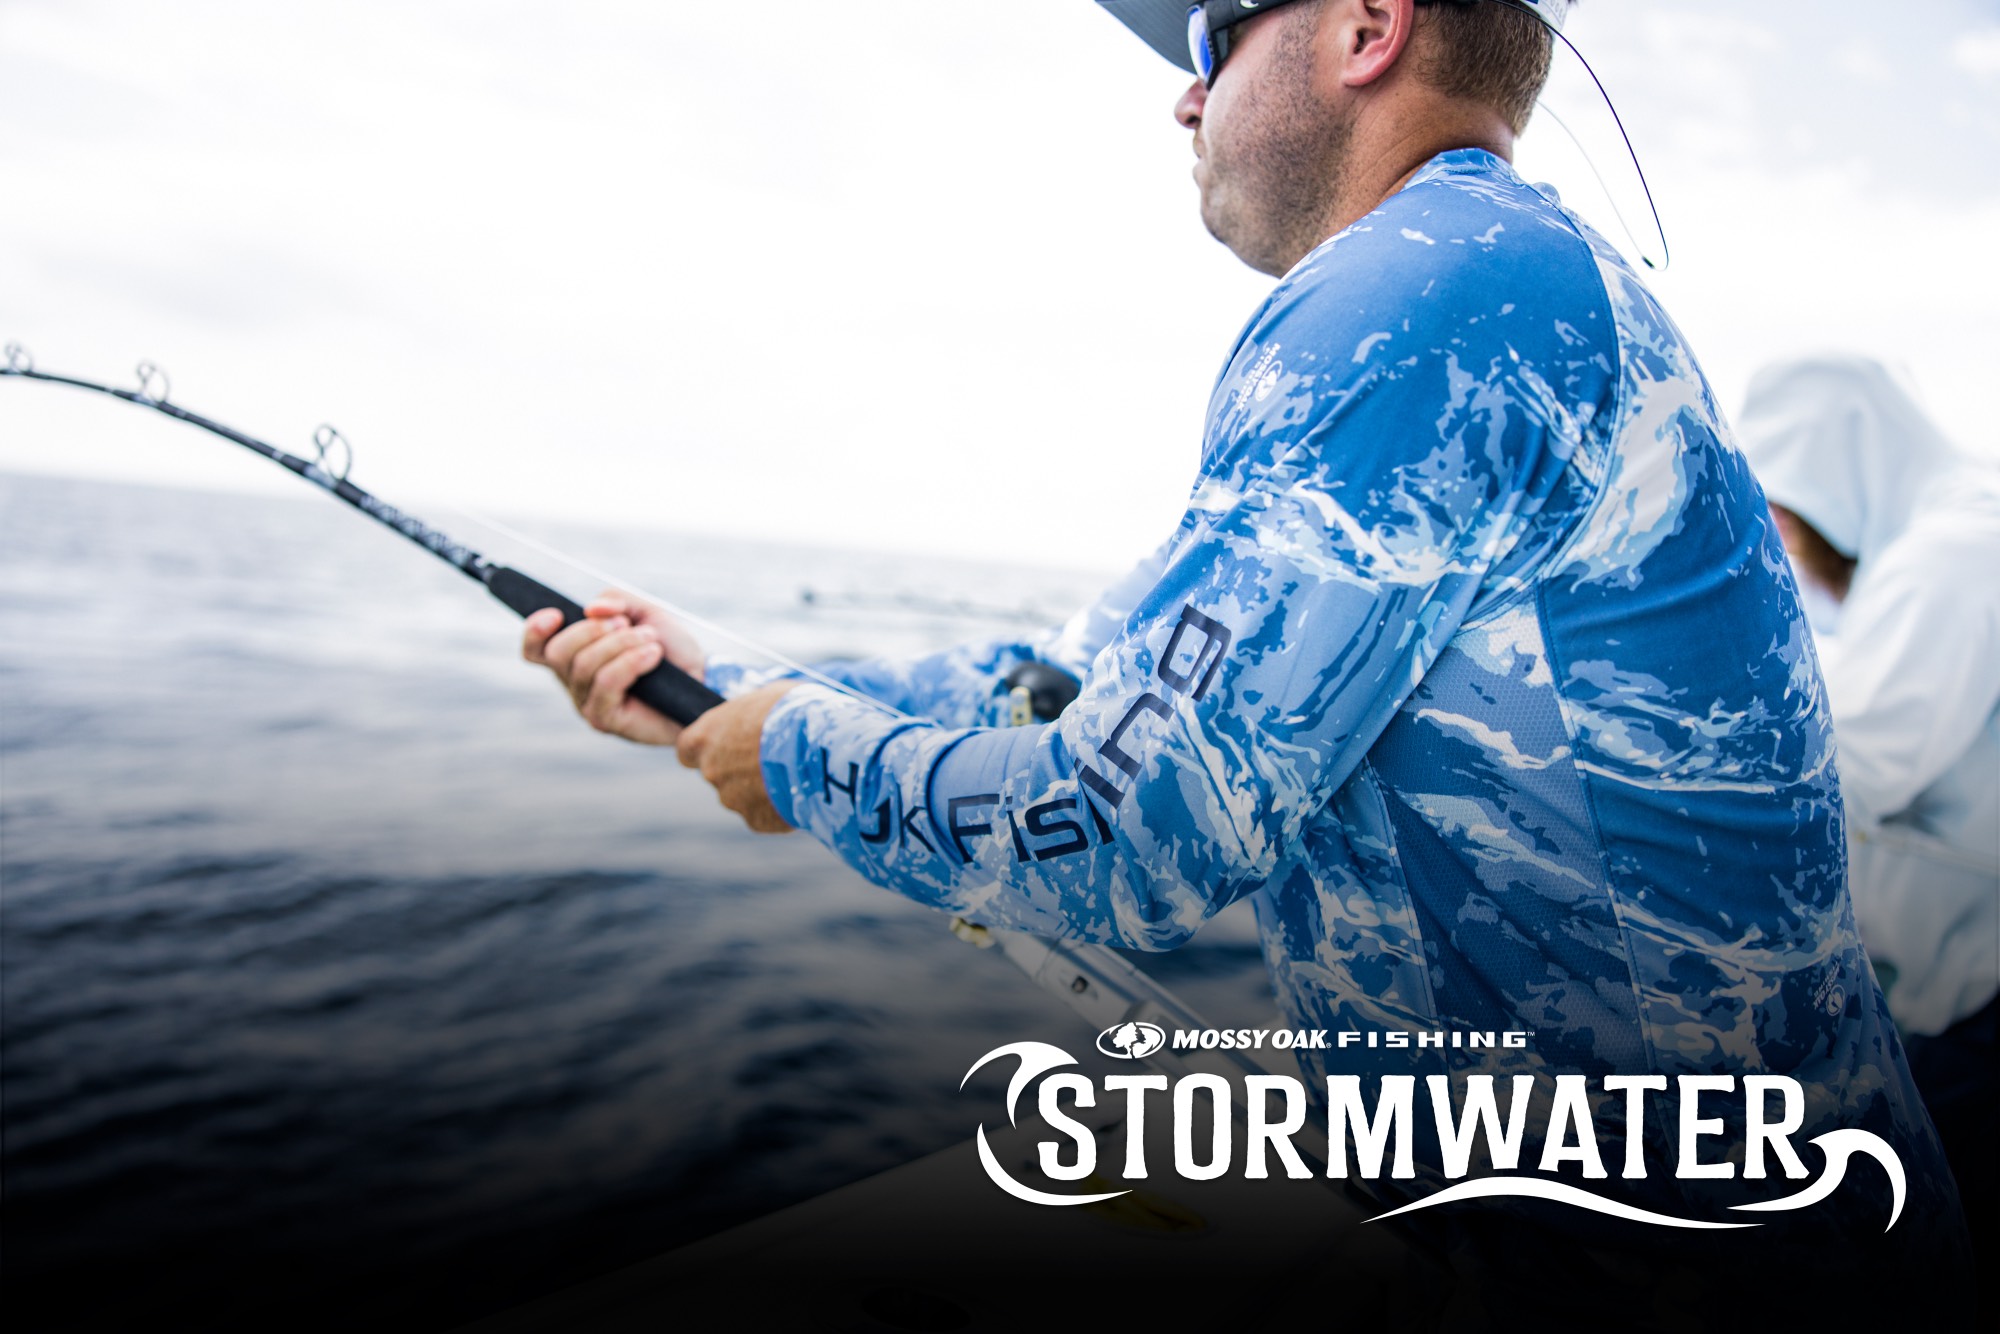 Mossy Oak and Huk Partner for New Fishing Pattern: Stormwater